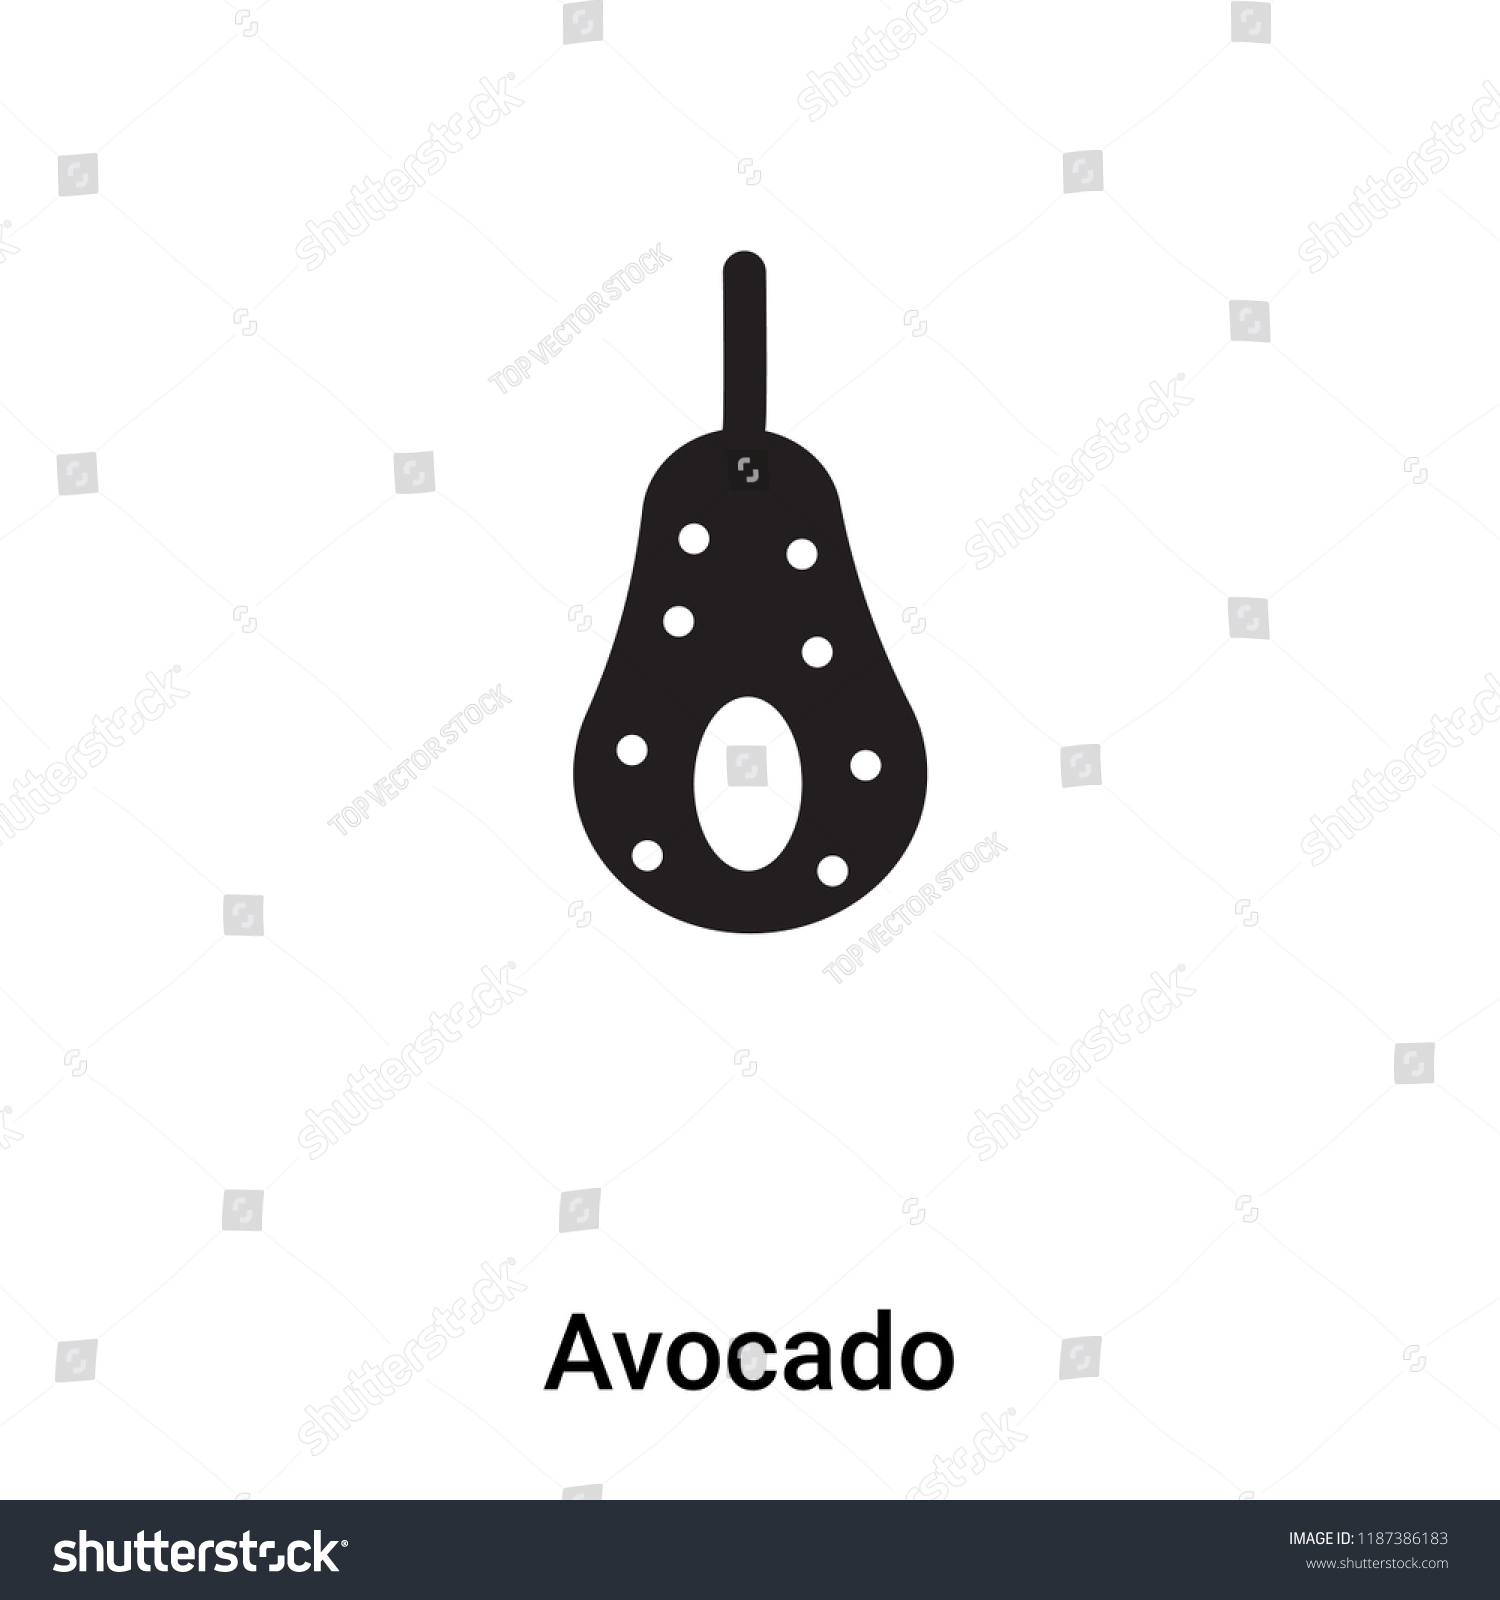 SVG of Avocado icon vector isolated on white background, logo concept of Avocado sign on transparent background, filled black symbol svg